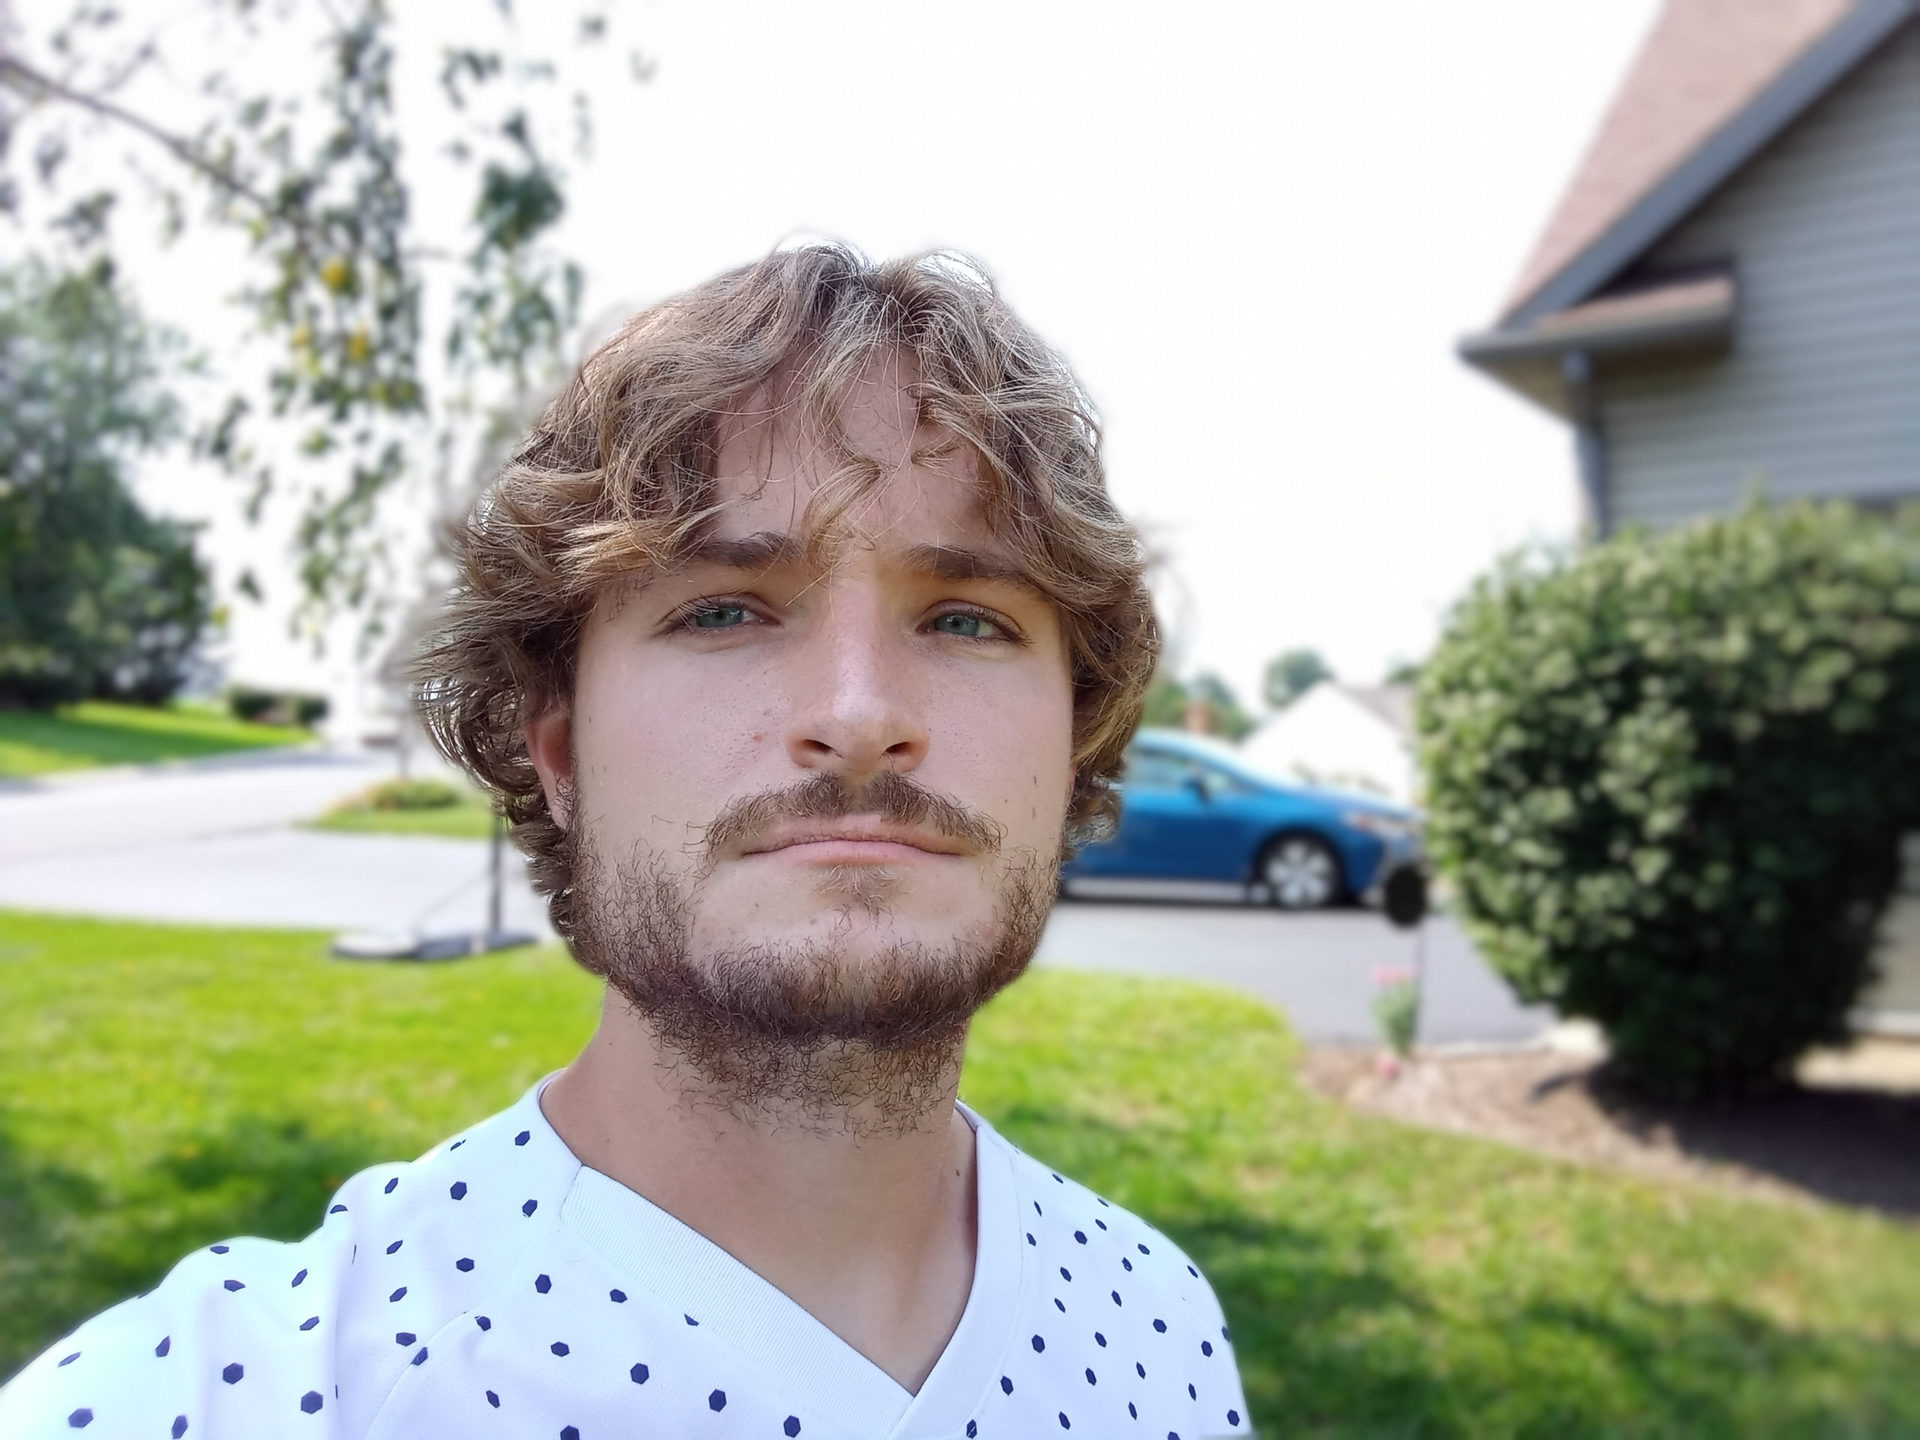 A portrait selfie of a man with light hair and facial hair wearing a white patterned t-shirt outdoors taken with the LG Premier Pro Plus 2